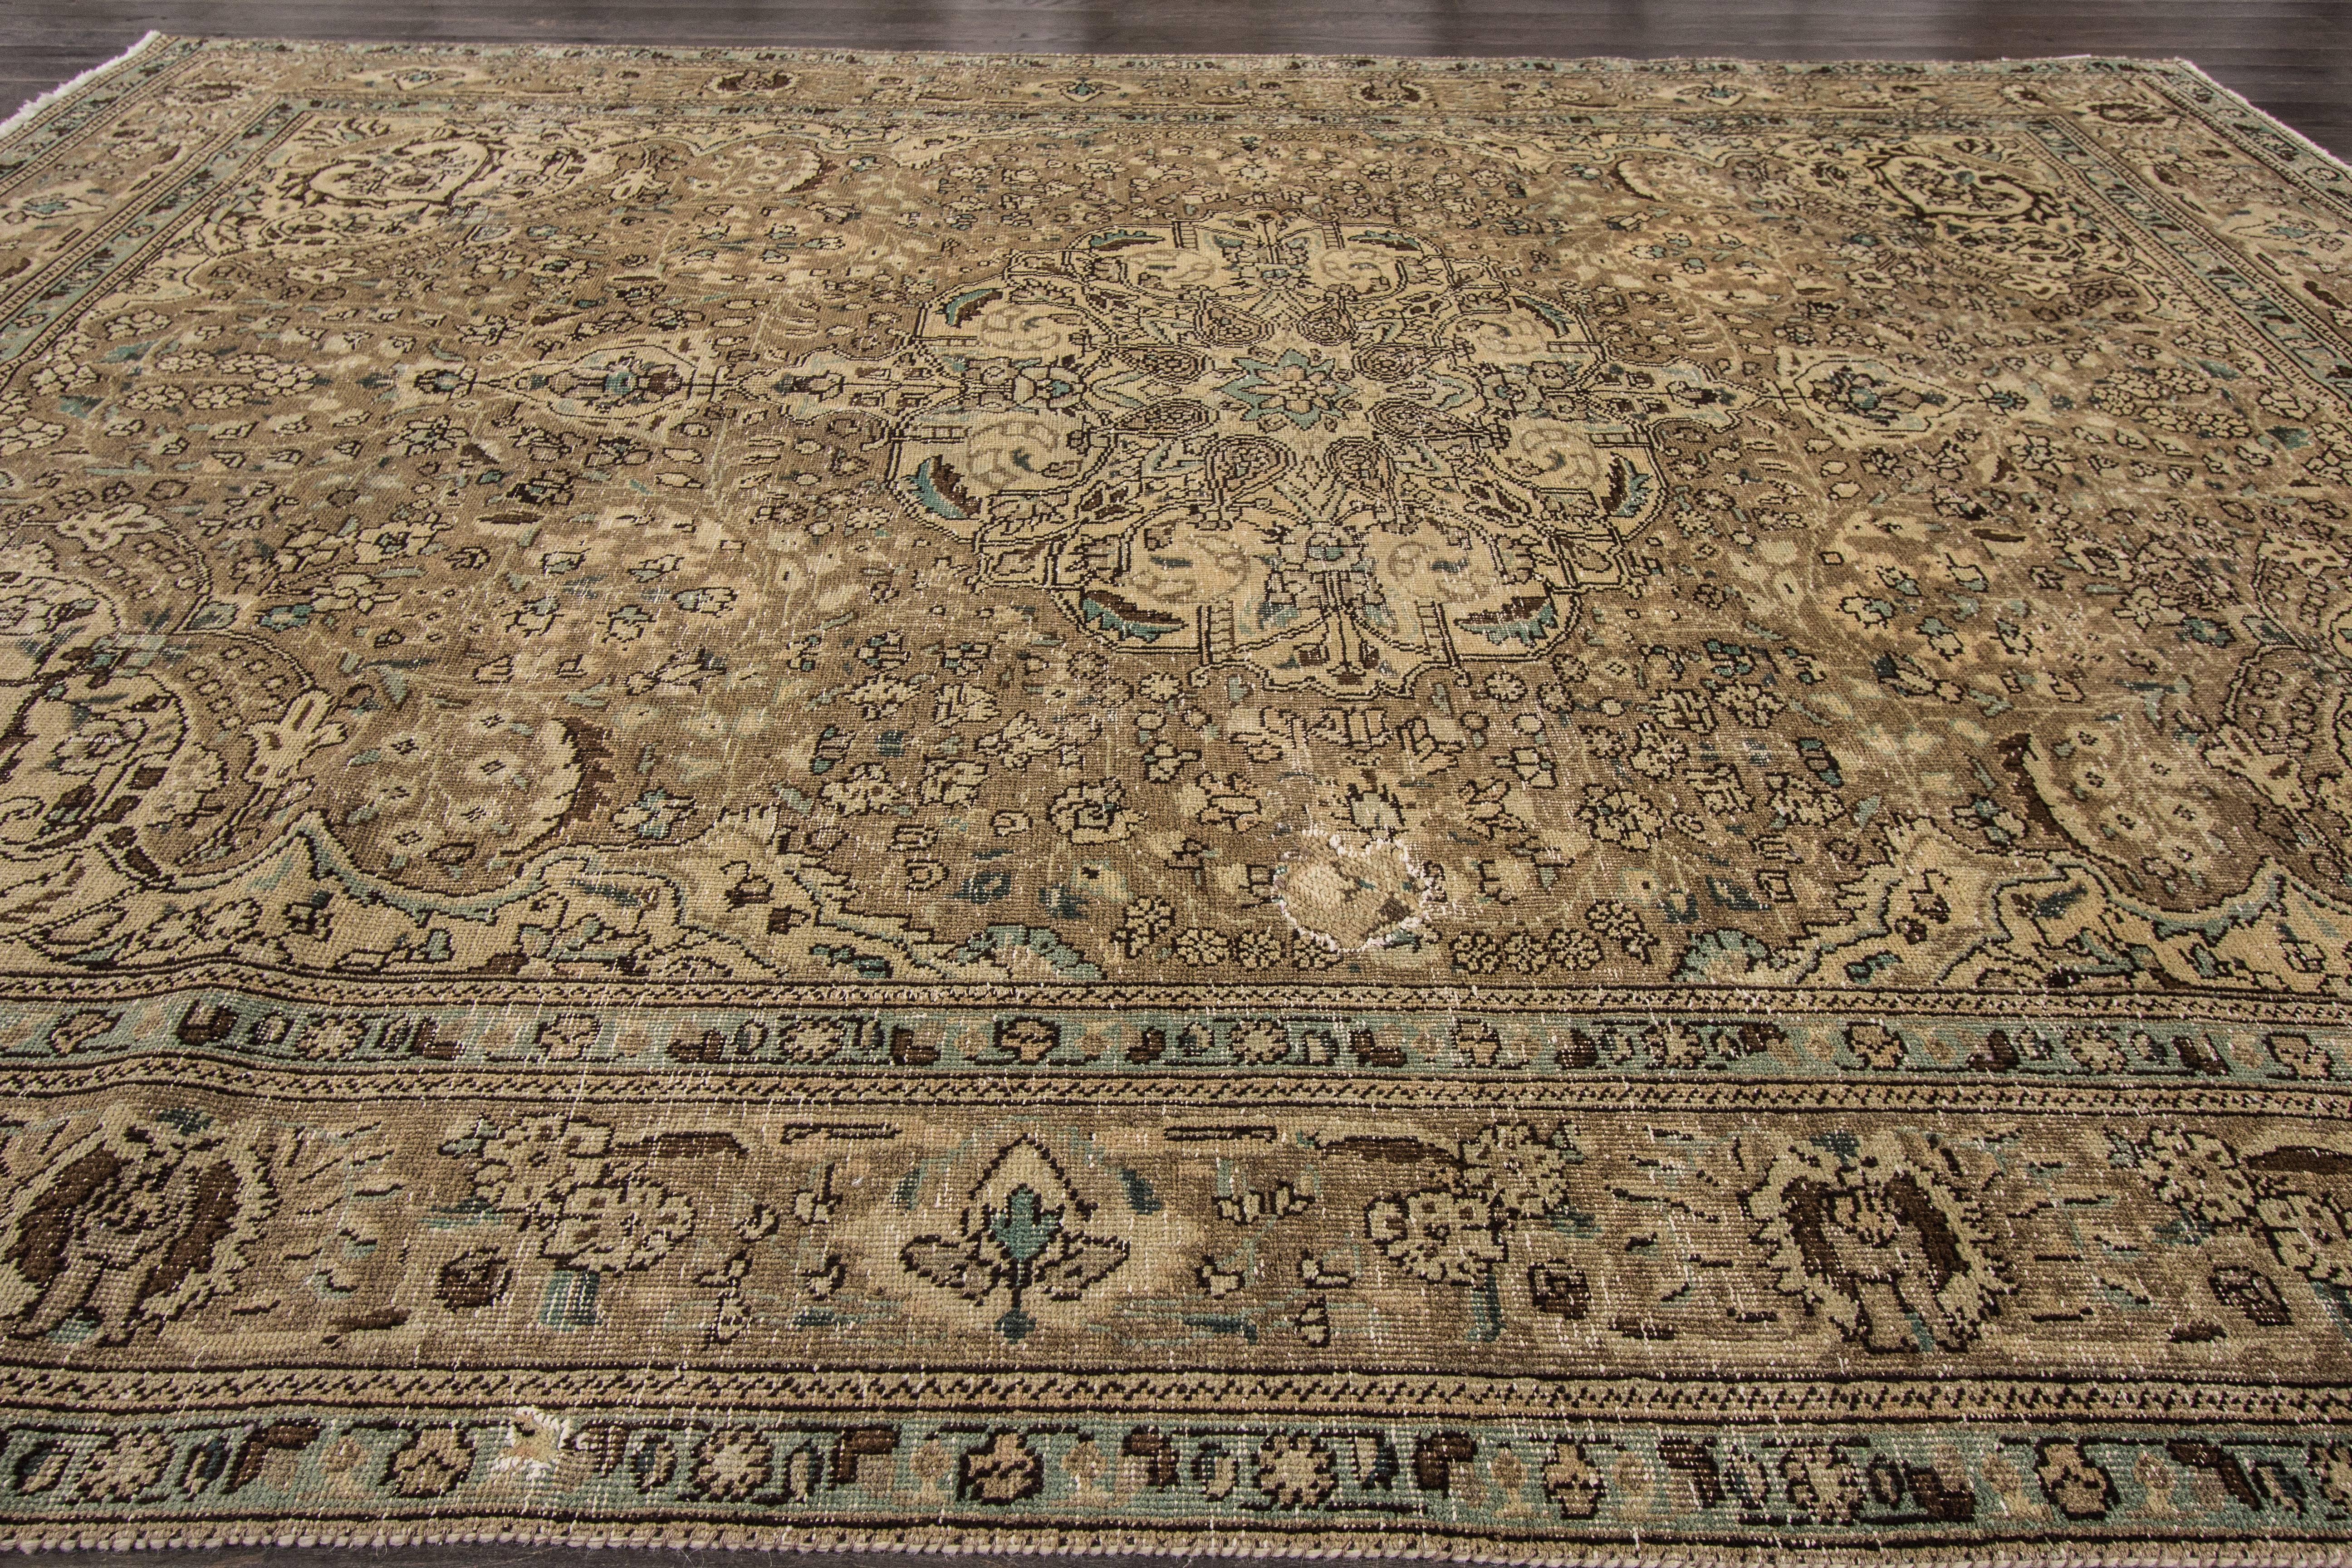 Gorgeous Antique Persian Tabriz Rug In Good Condition For Sale In Norwalk, CT